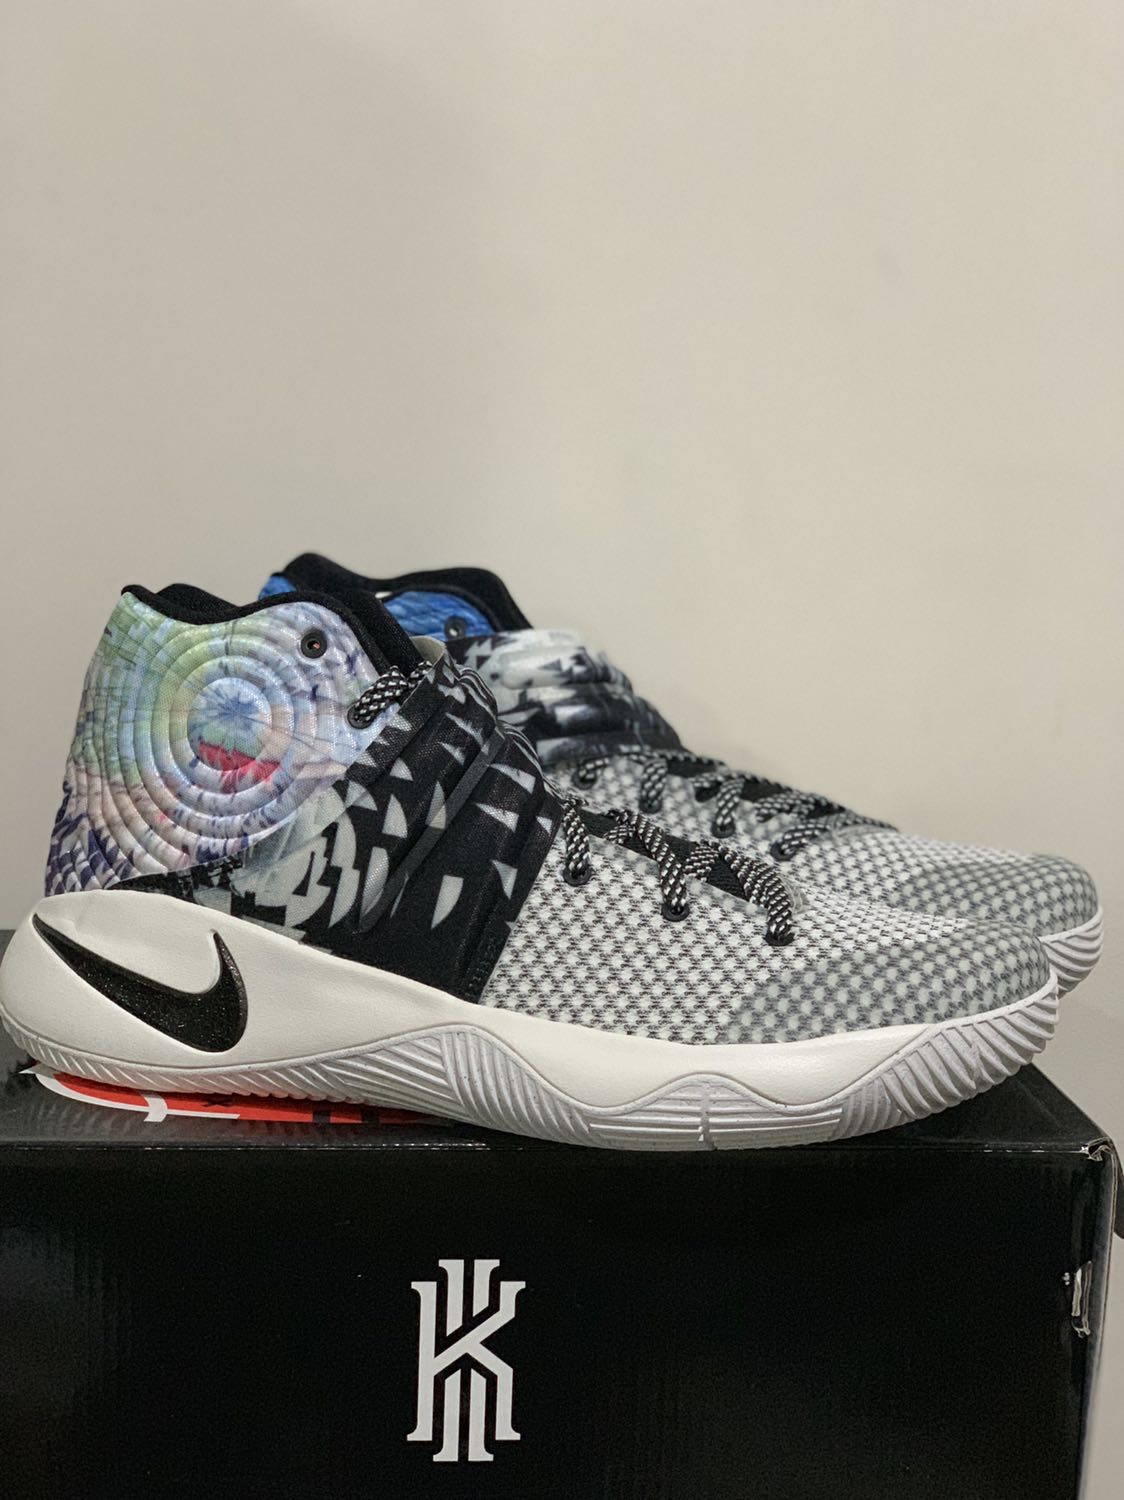 kyrie size 12